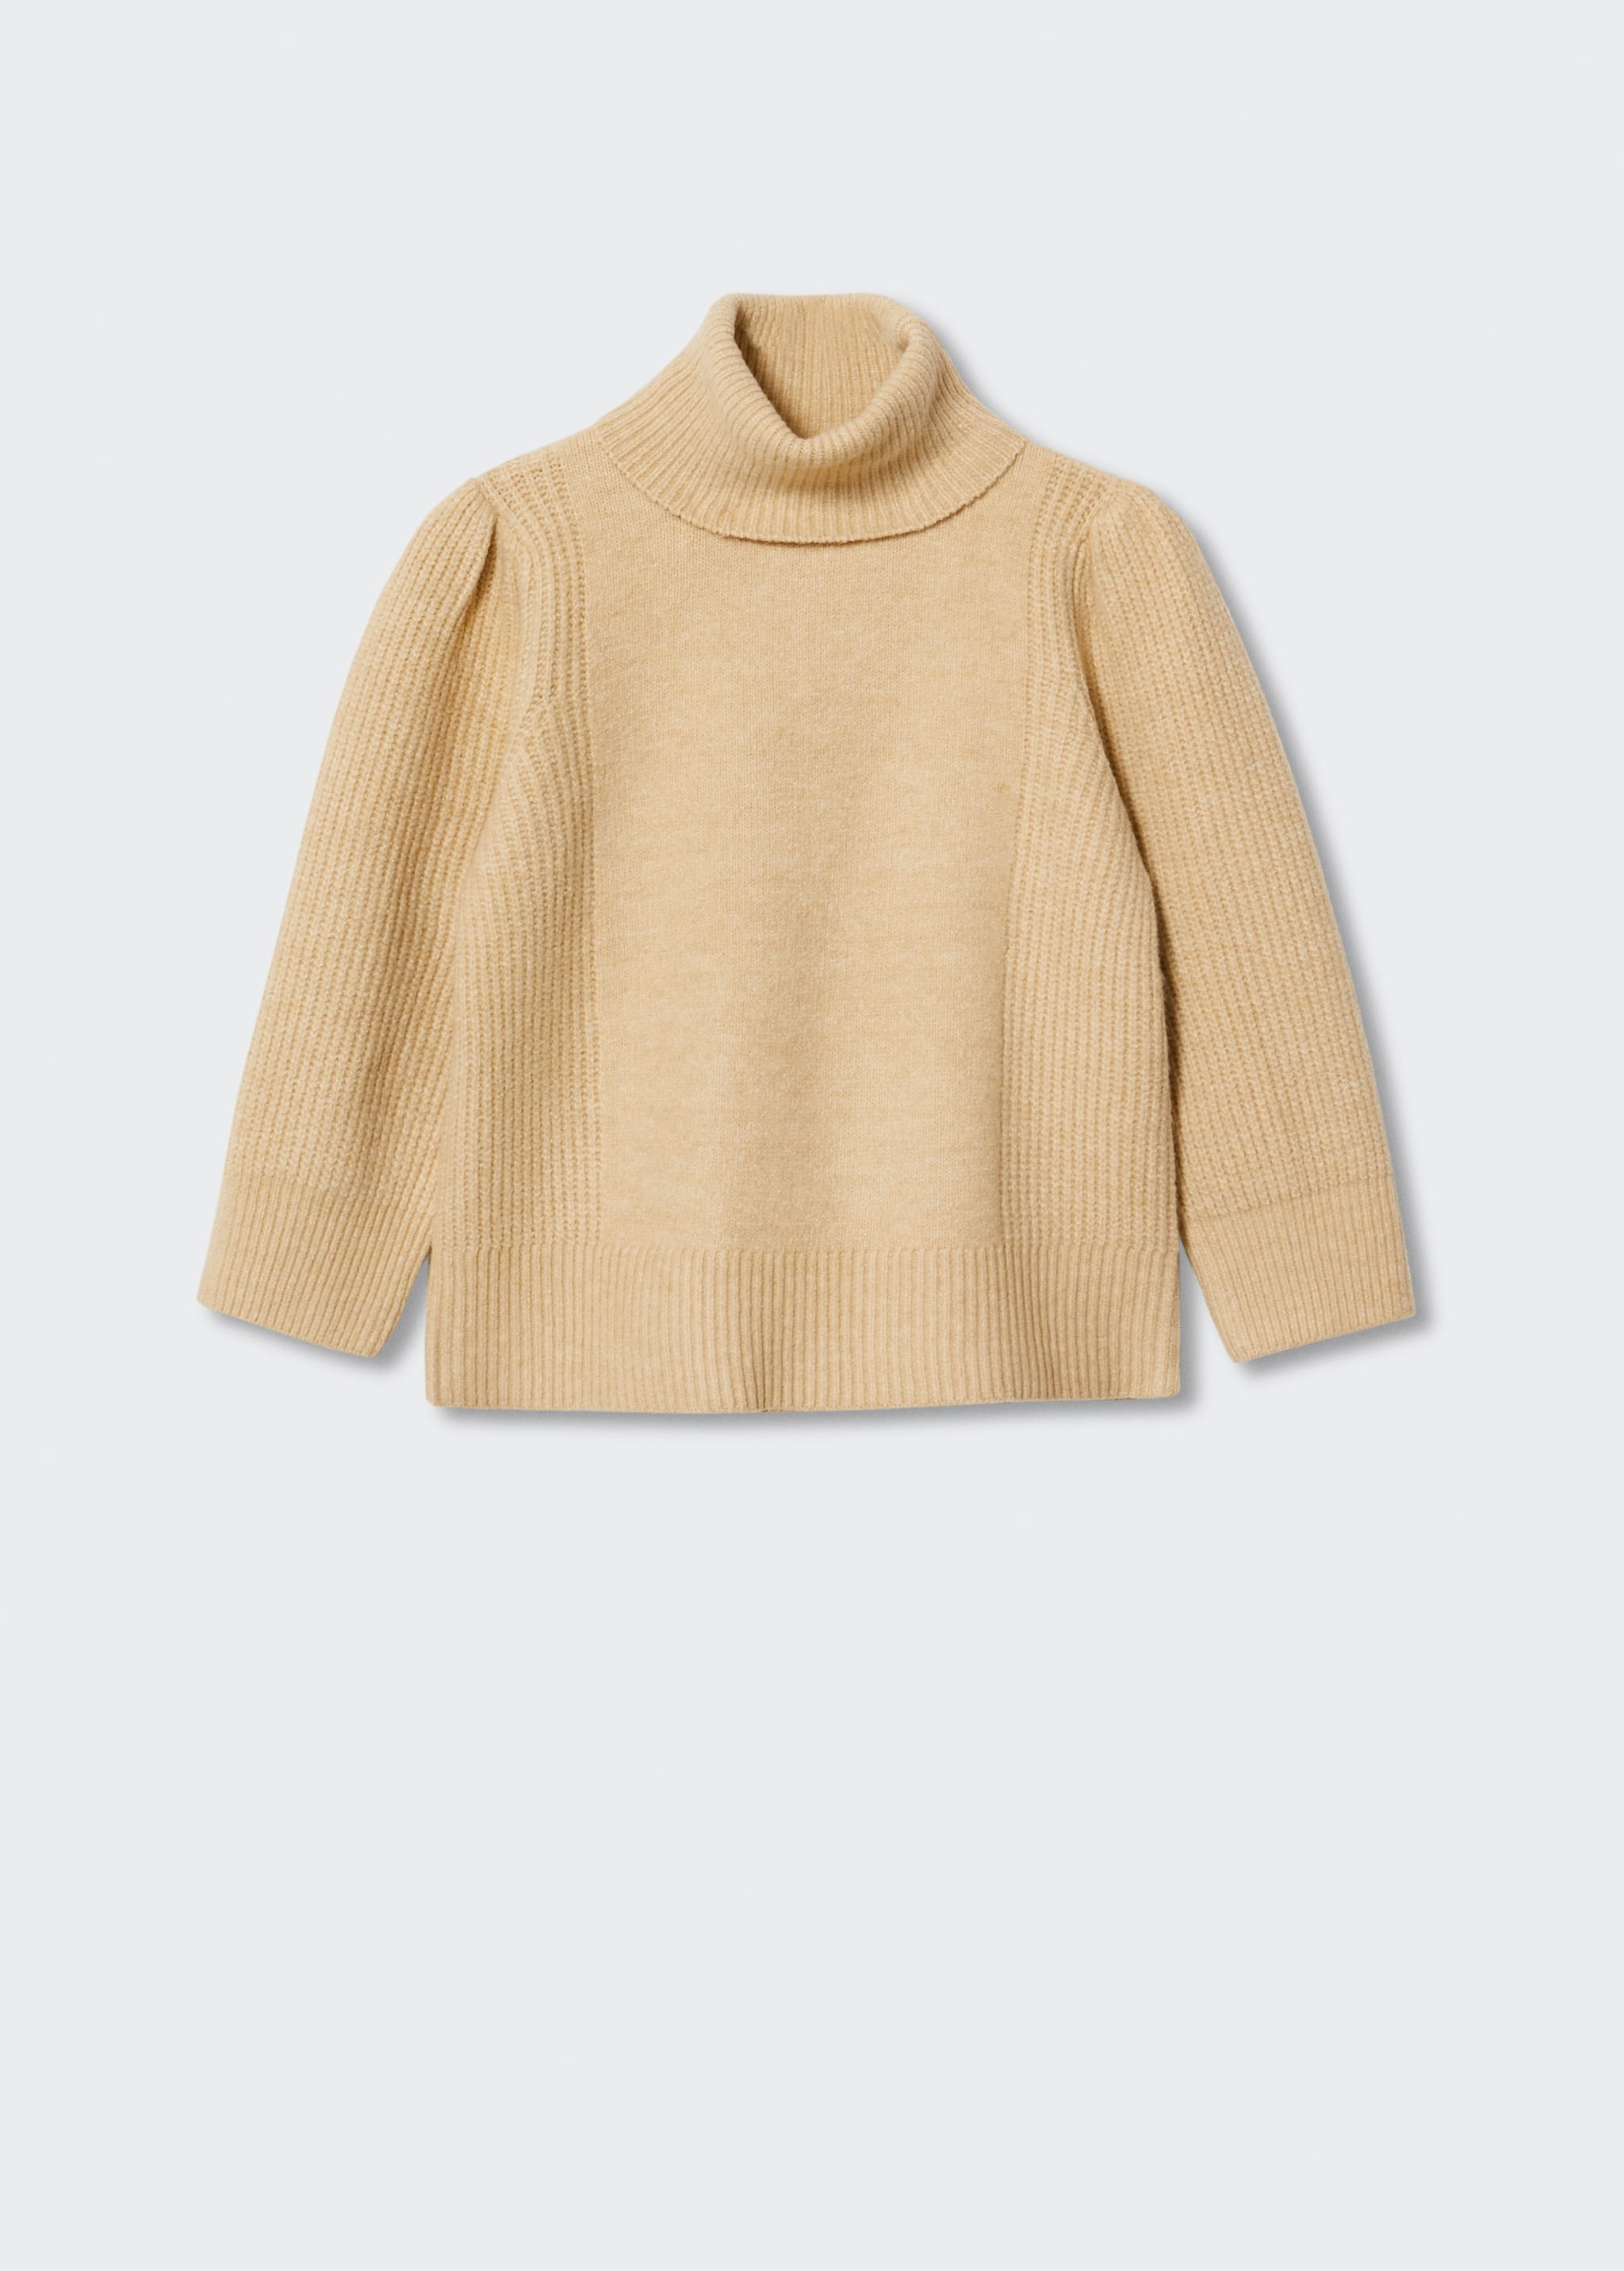 Turtleneck knitted sweater - Article without model